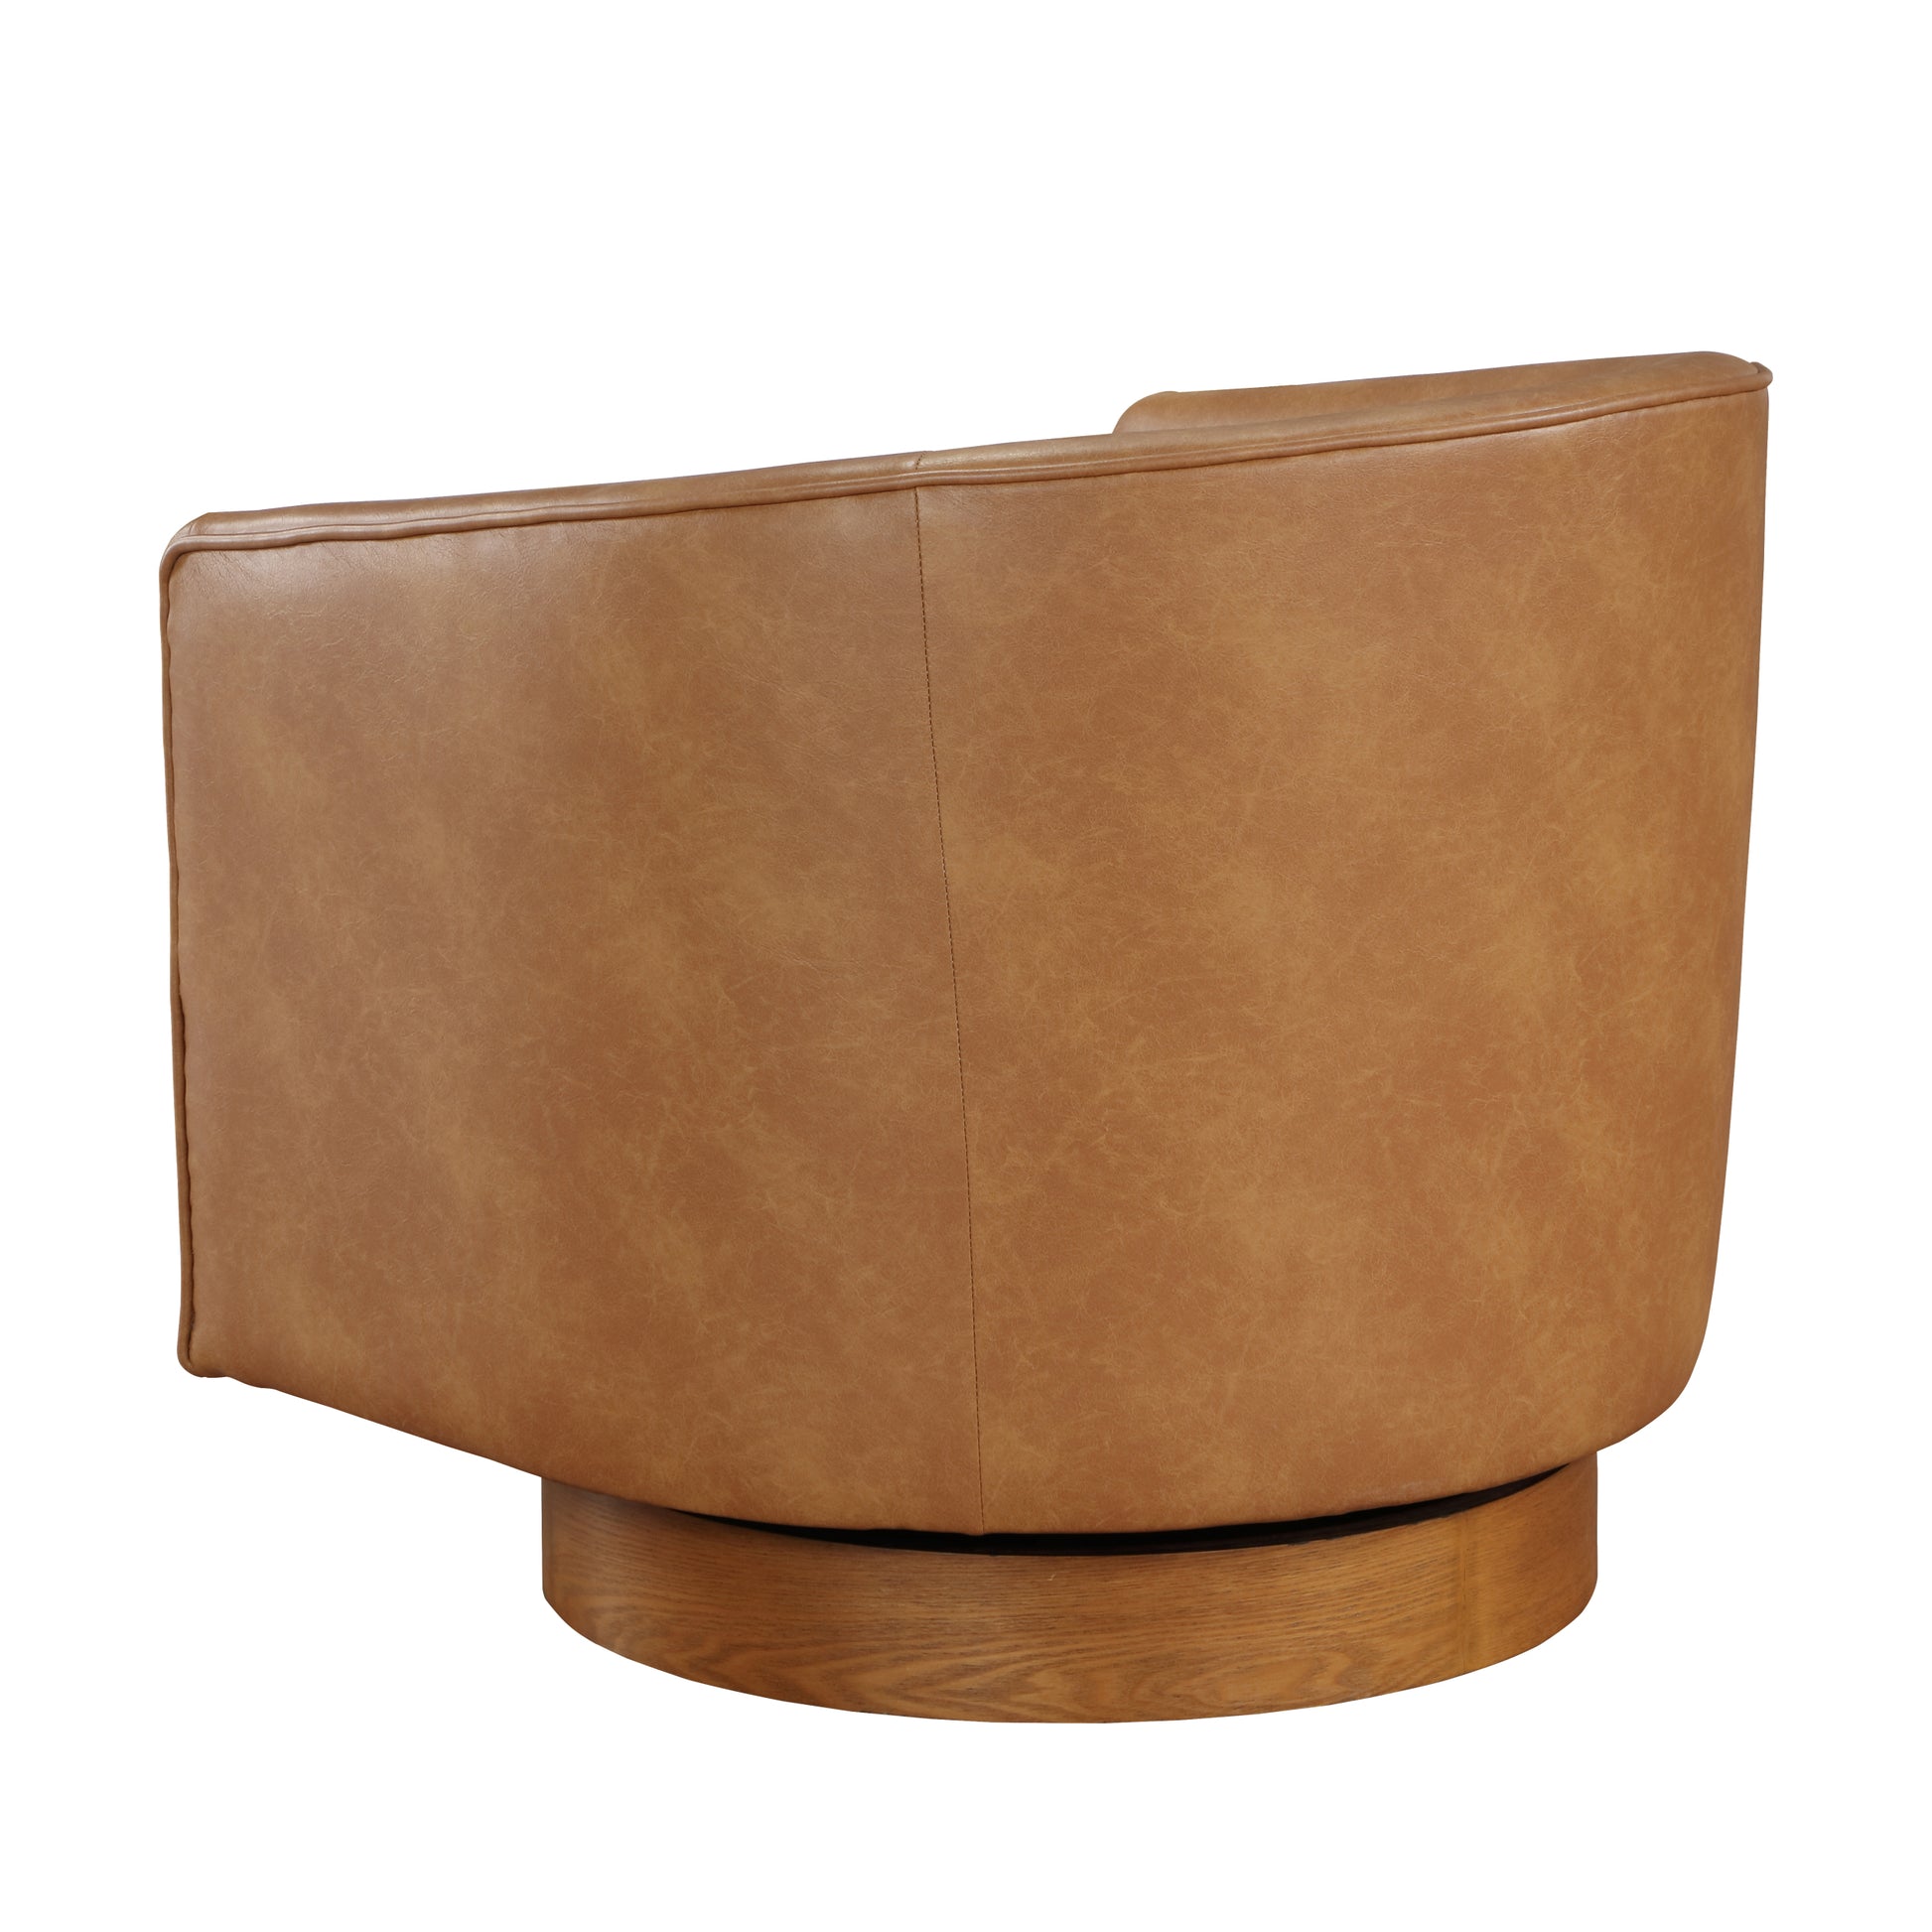 Maisy Saddle Faux Leather Wood Base Barrell Swivel brown-foam-polyester